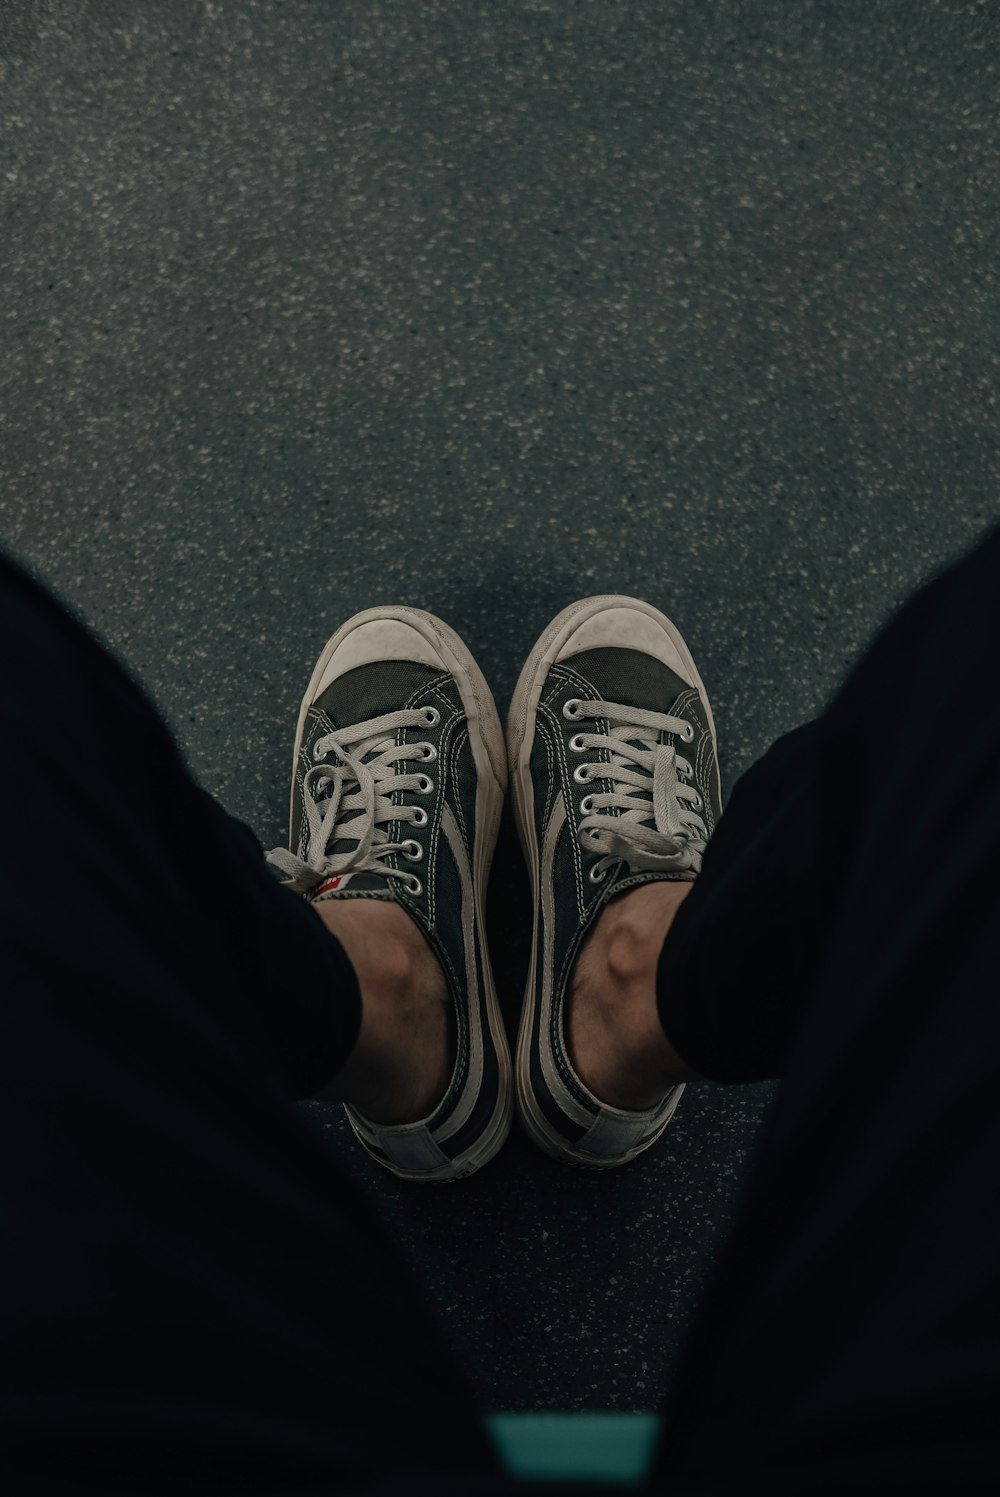 person wearing black pants and gray and white sneakers